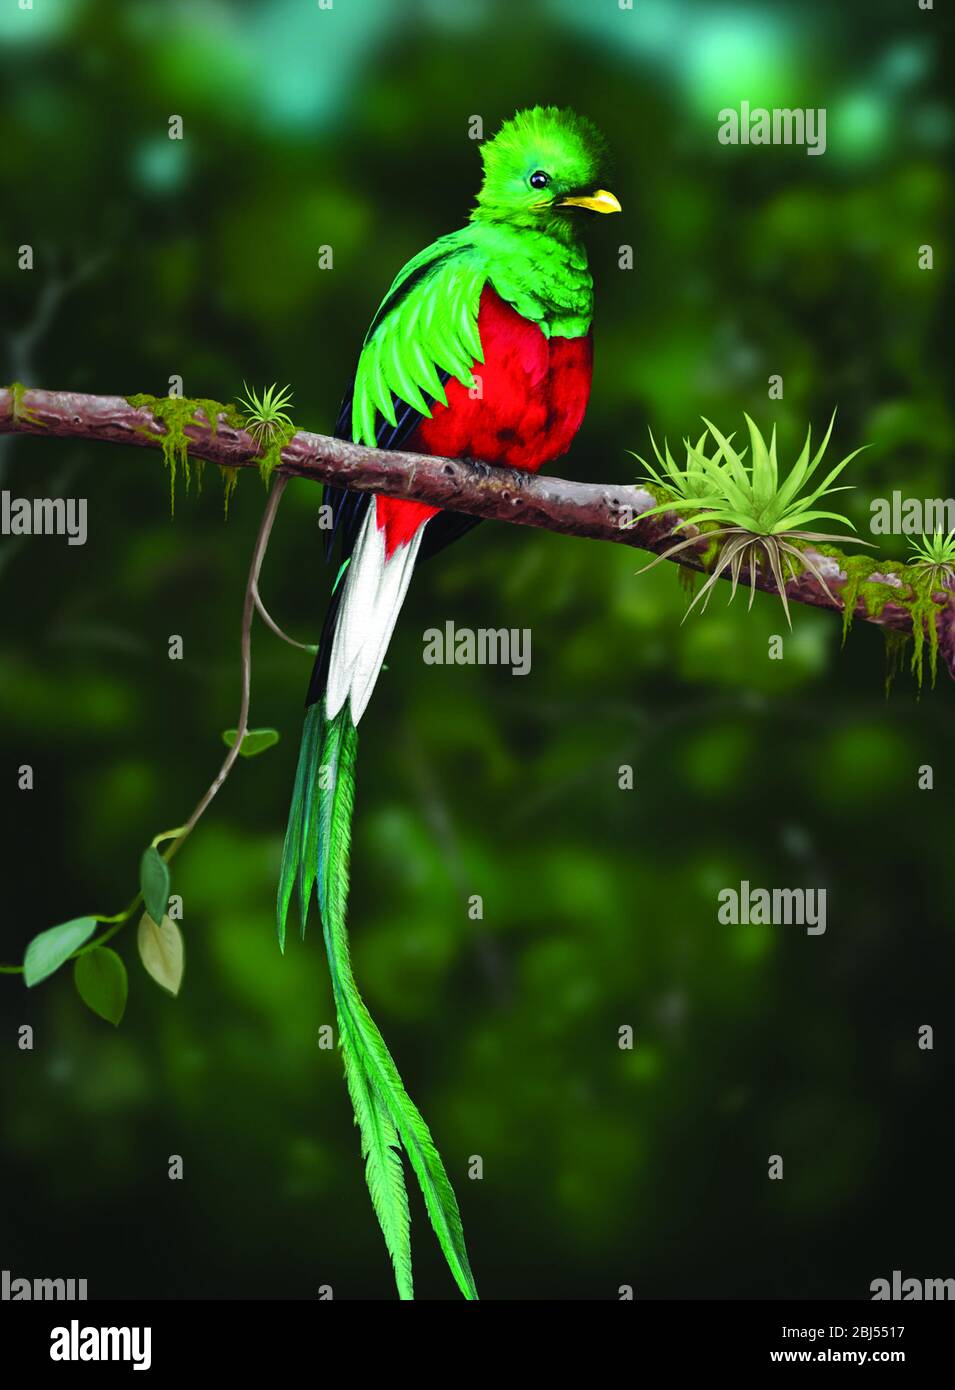 Quetzal - Pharomachrus mocinno male - bird in the trogon family. It is found from Chiapas, Mexico to western Panama. It is well known for its colorful. Stock Photo